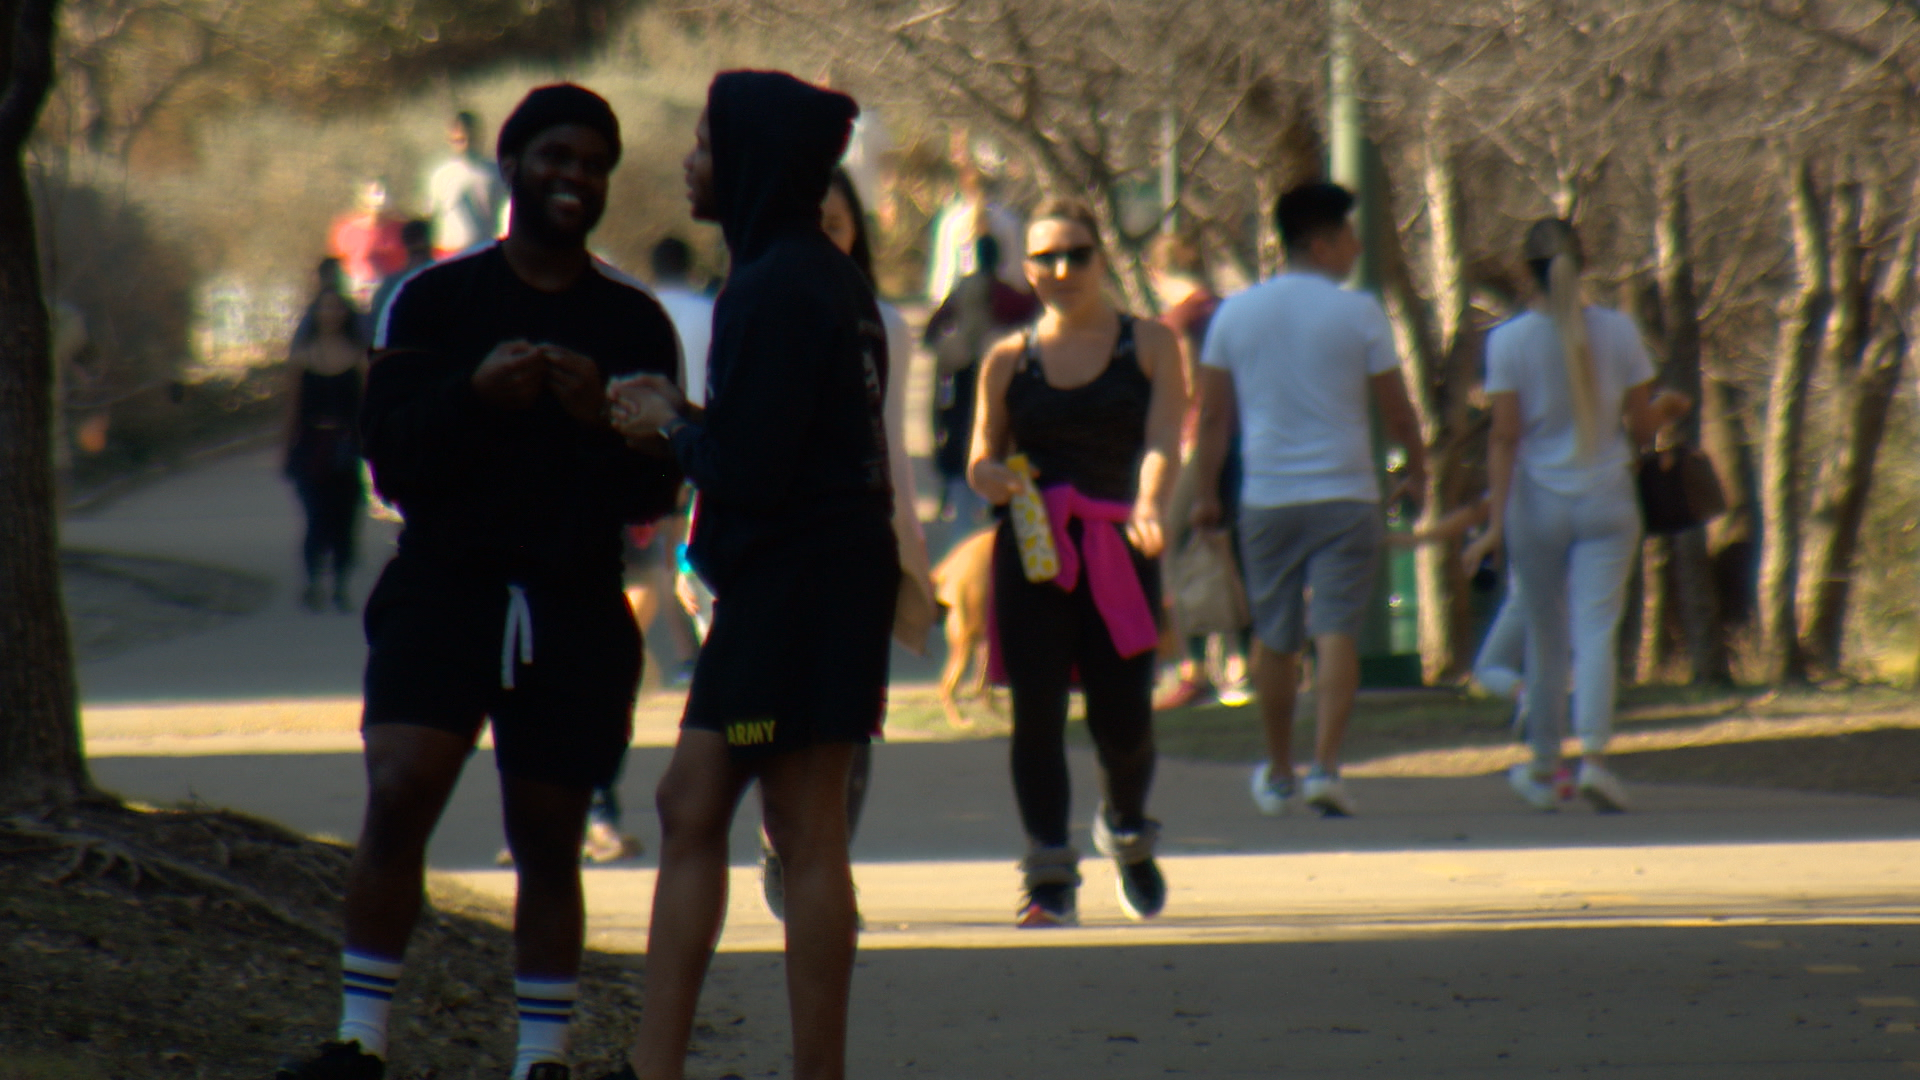 D-FW was treated to 70-plus degree weather on Sunday, finally allowing thousands to get out of the house and enjoy the sunshine.